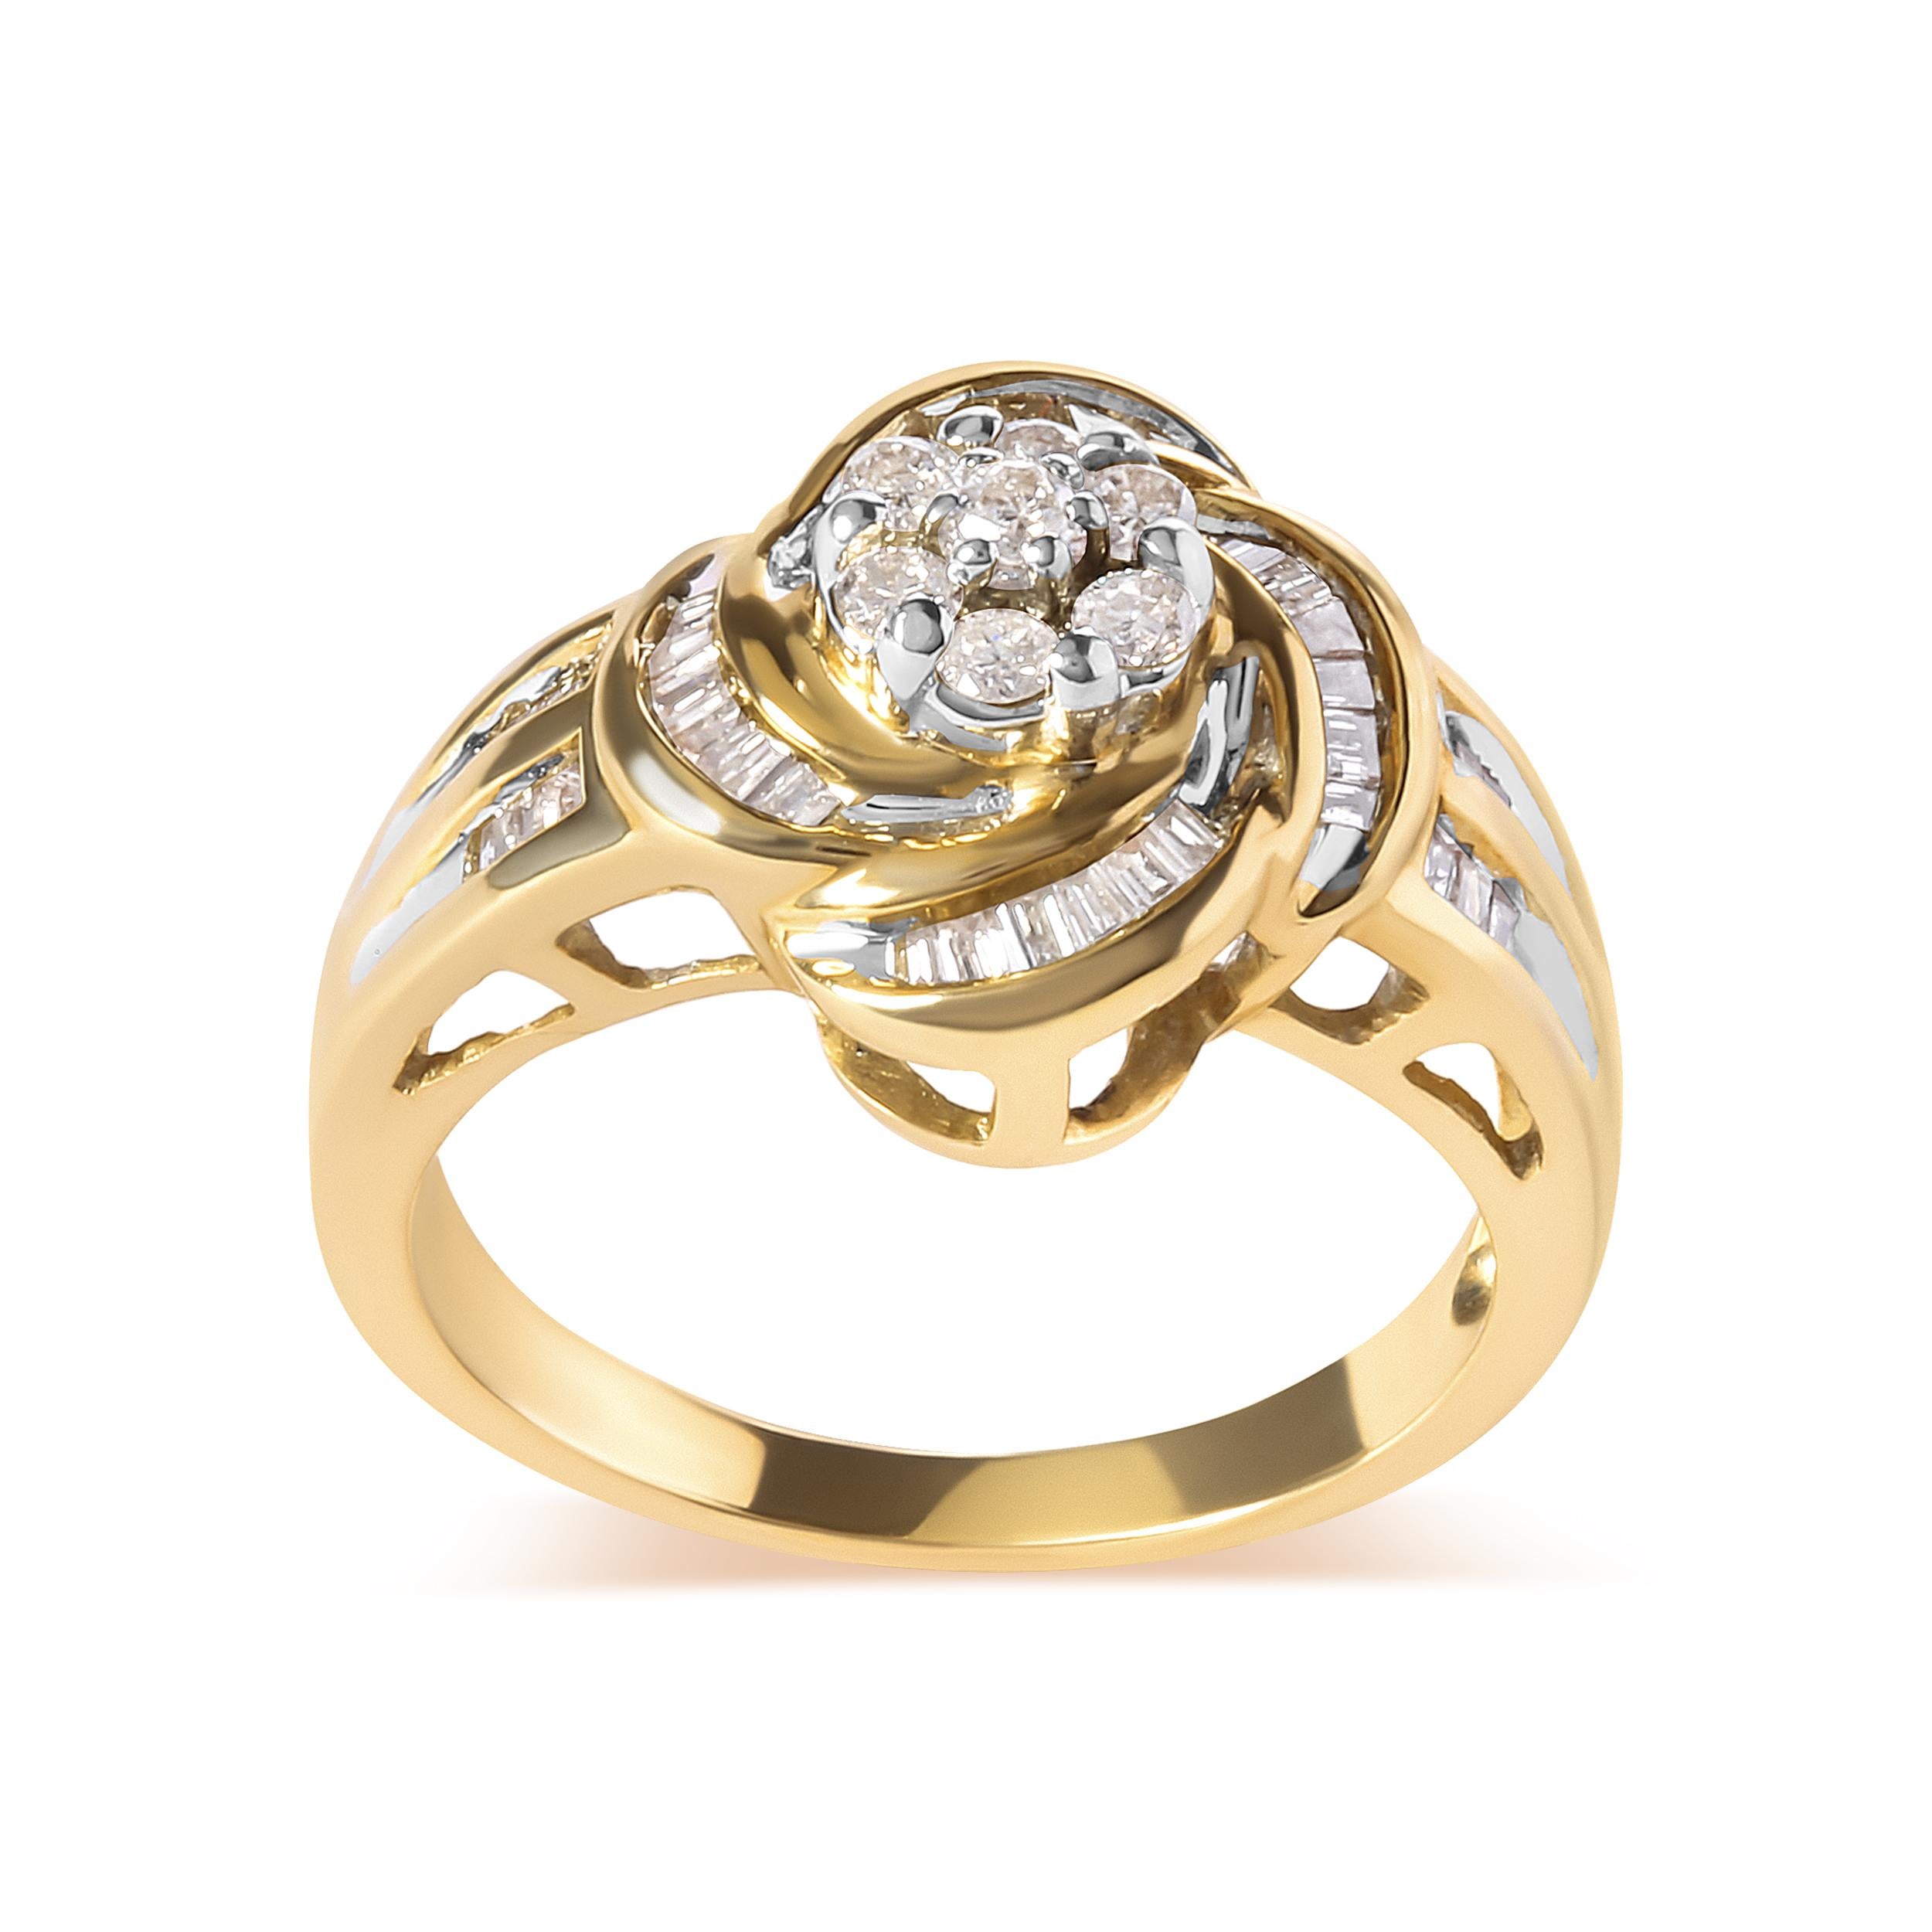 Indulge in the timeless beauty of this 10K yellow gold flower swirl cocktail ring, adorned with 43 natural diamonds totaling 1/2 cttw. The intricate design features round and baguette diamonds arranged in a delicate floral pattern, adding a touch of